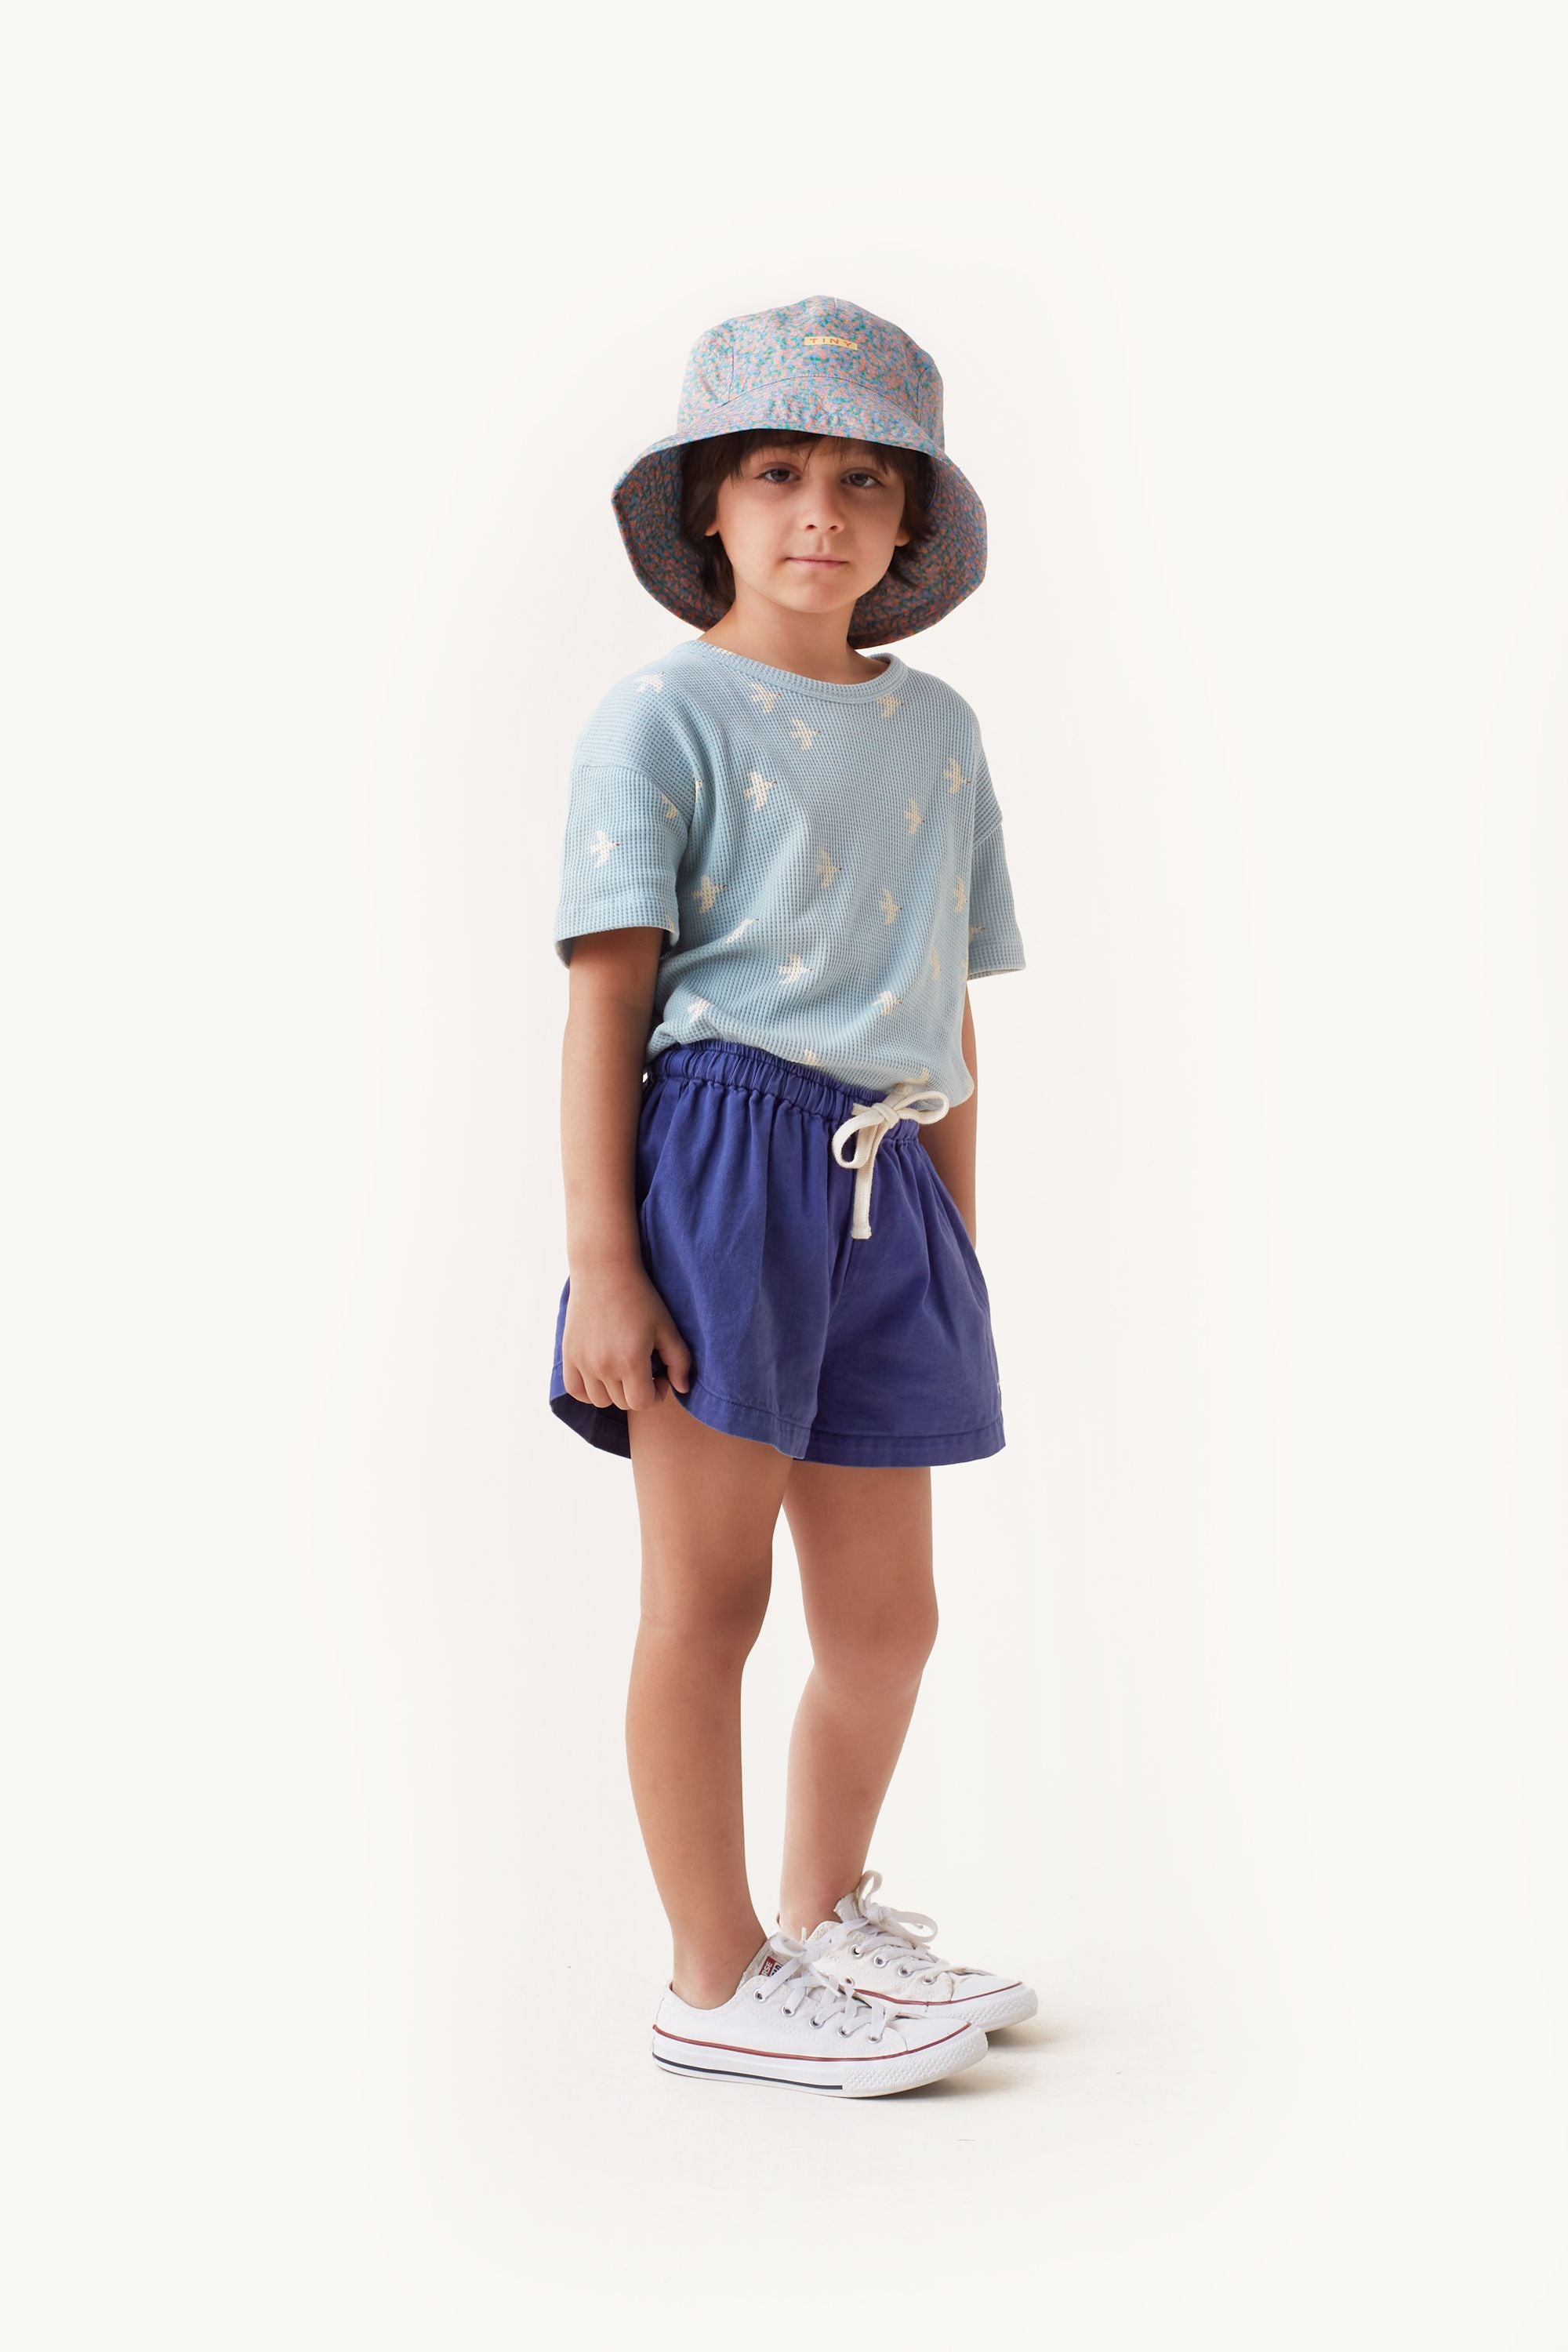 Tiny Cottons Solid Shorts - Ultramarine